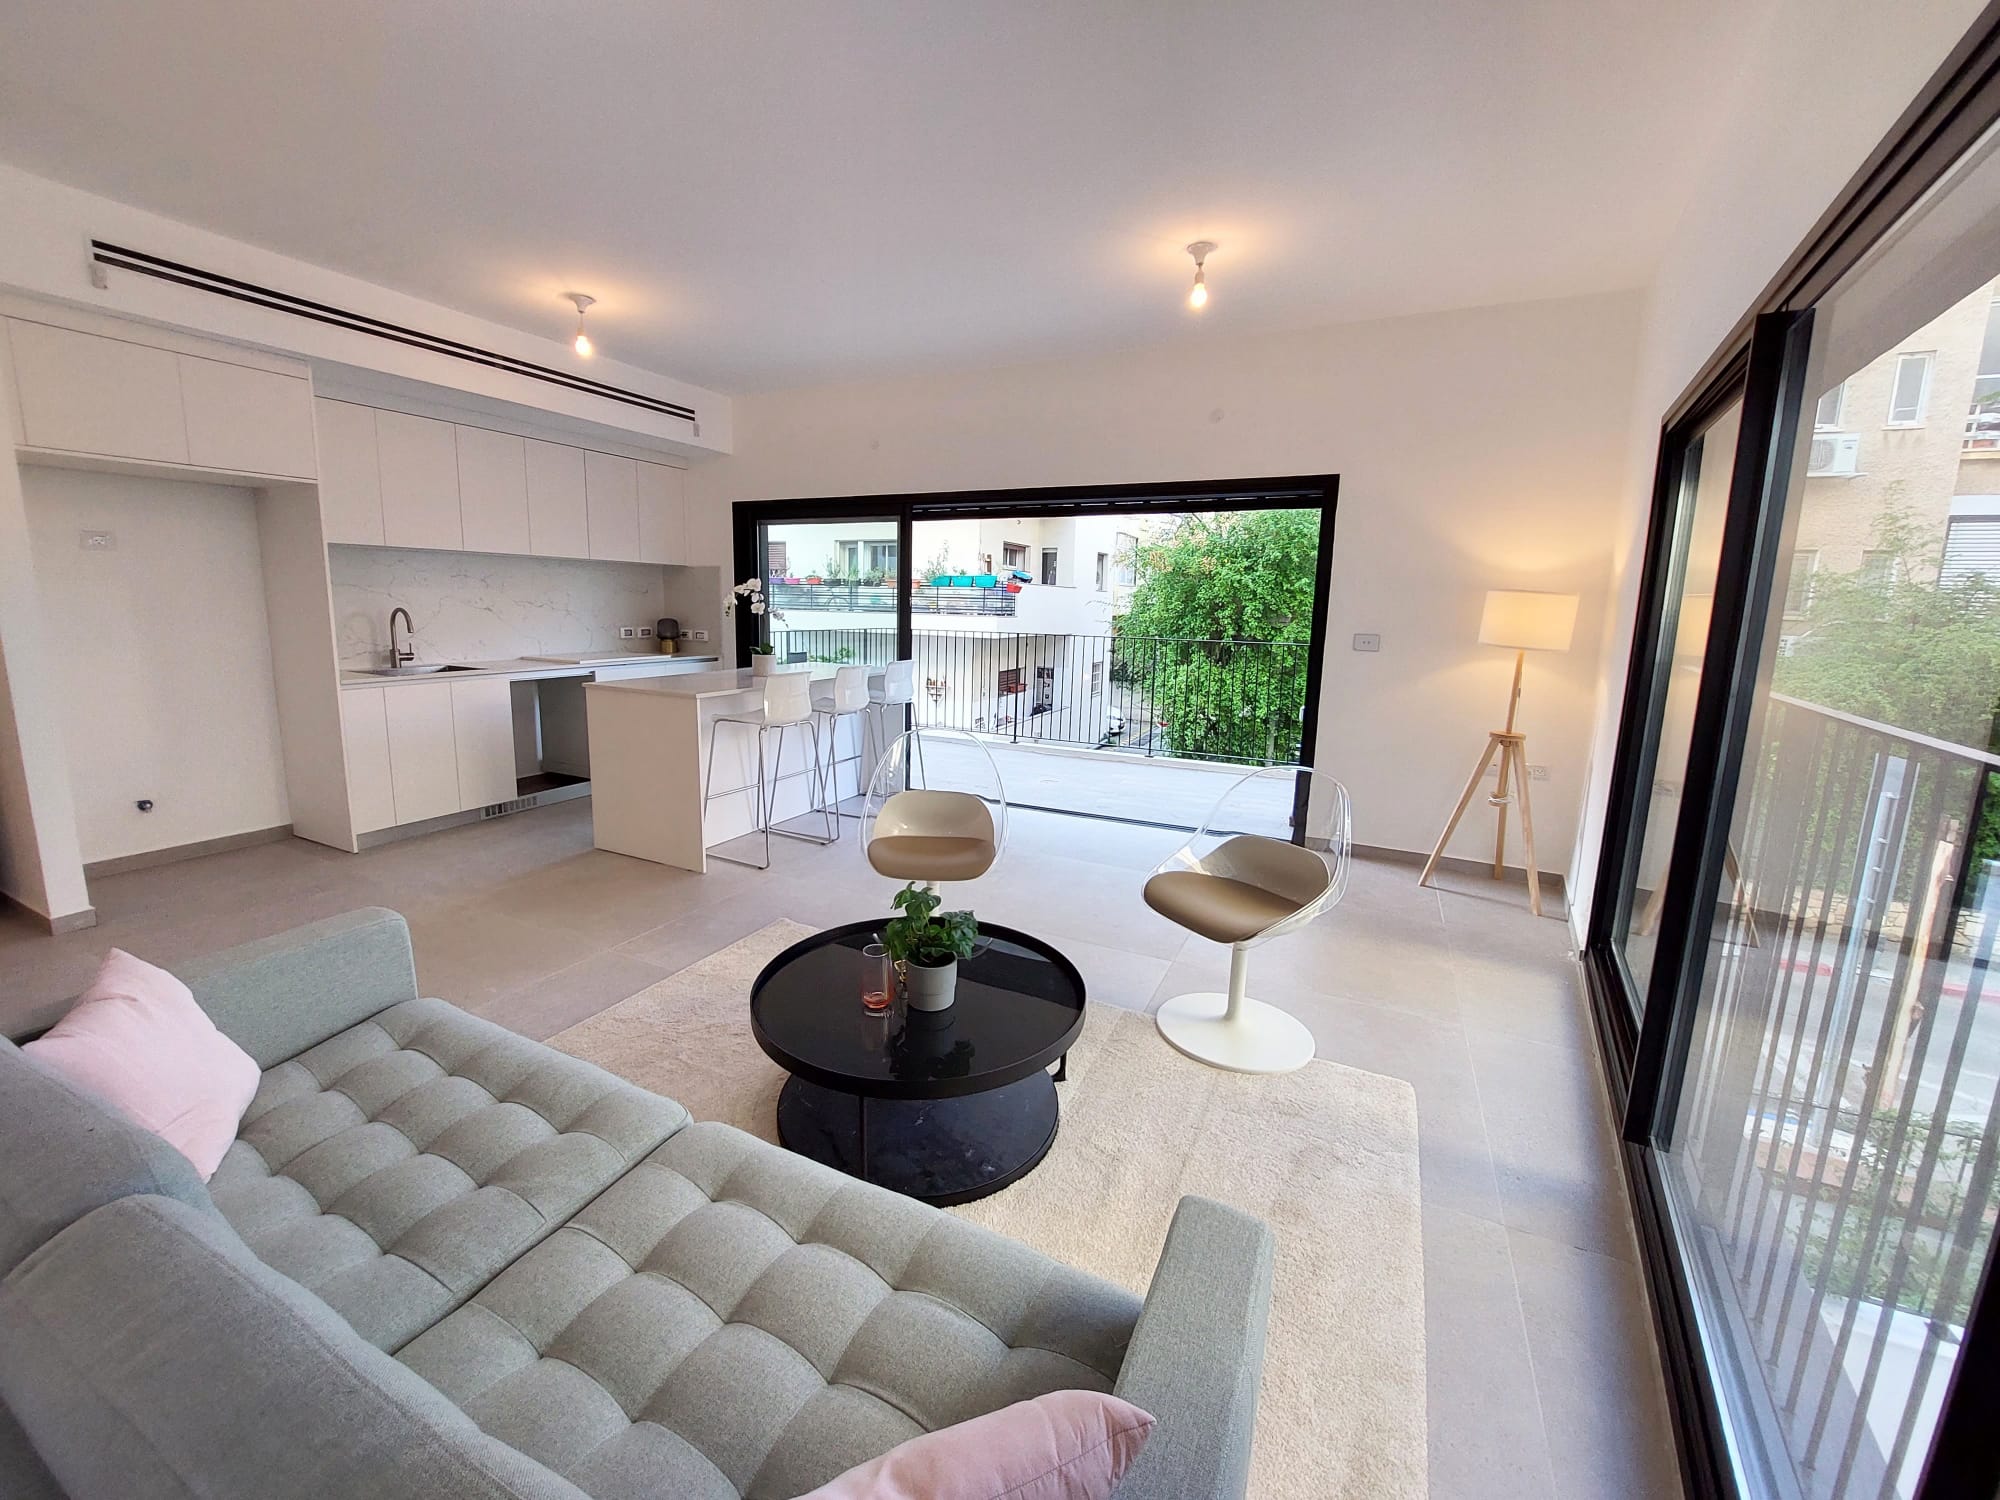 For Sale: A Beautiful Brand New Apartment in a Boutique Project in Tel Aviv City Center